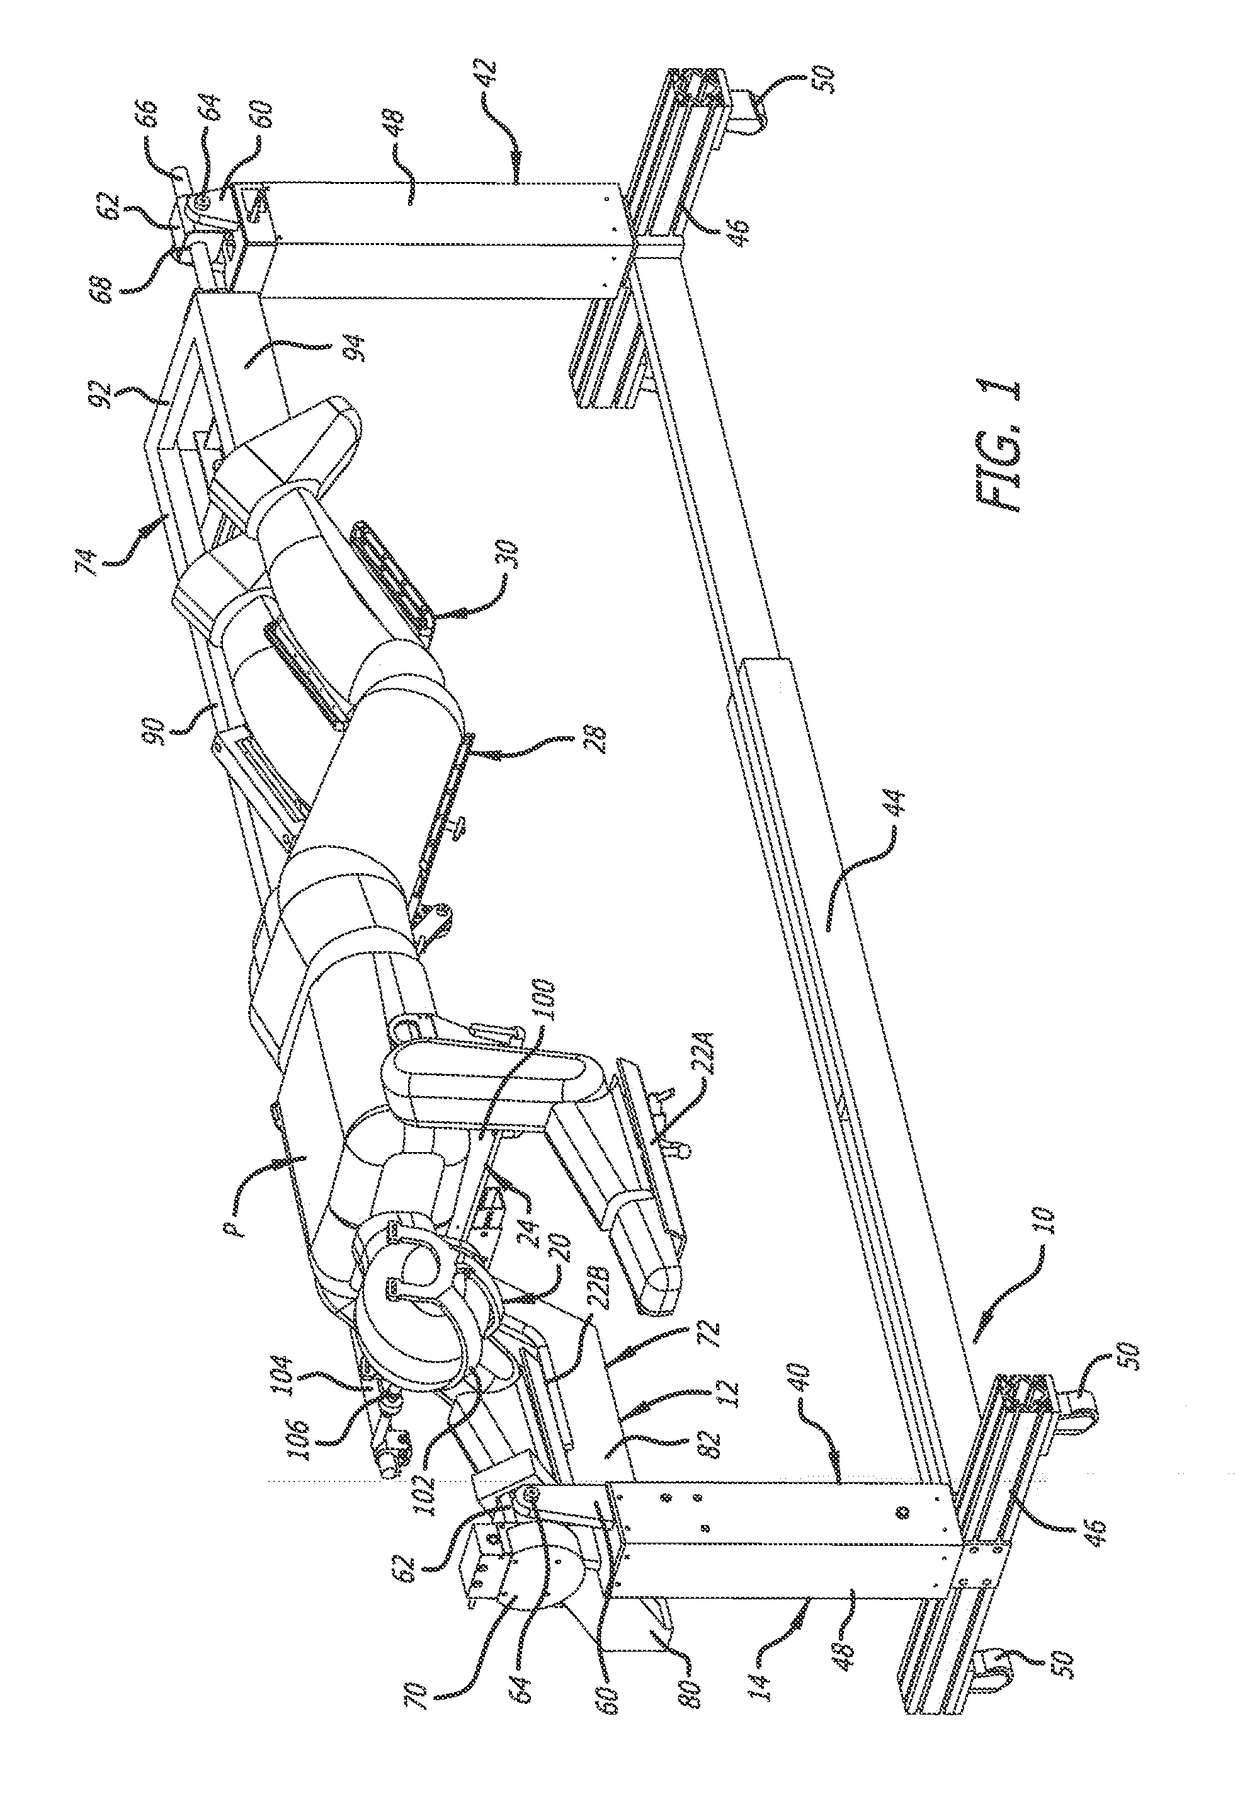 Surgical frame having translating lower beam and method for use thereof